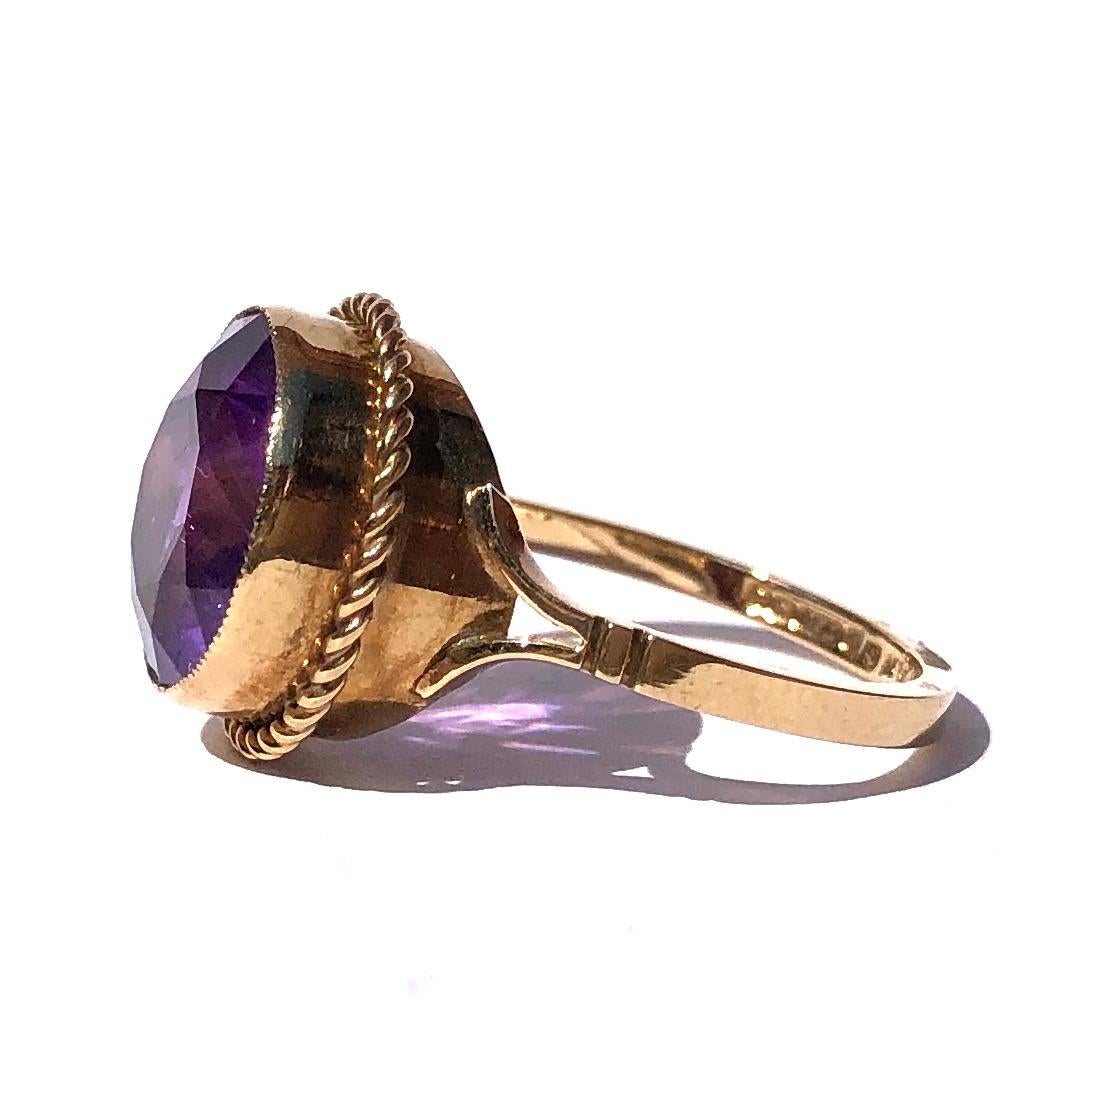 The colour of this amethyst is simply stunning and such a bright shade of purple. The stone is set in a simple setting with rope twist detail and then carries down to split shoulders. Made in Birmingham, England. 

Ring Size: O 1/2 or 7 1/4 
Stone